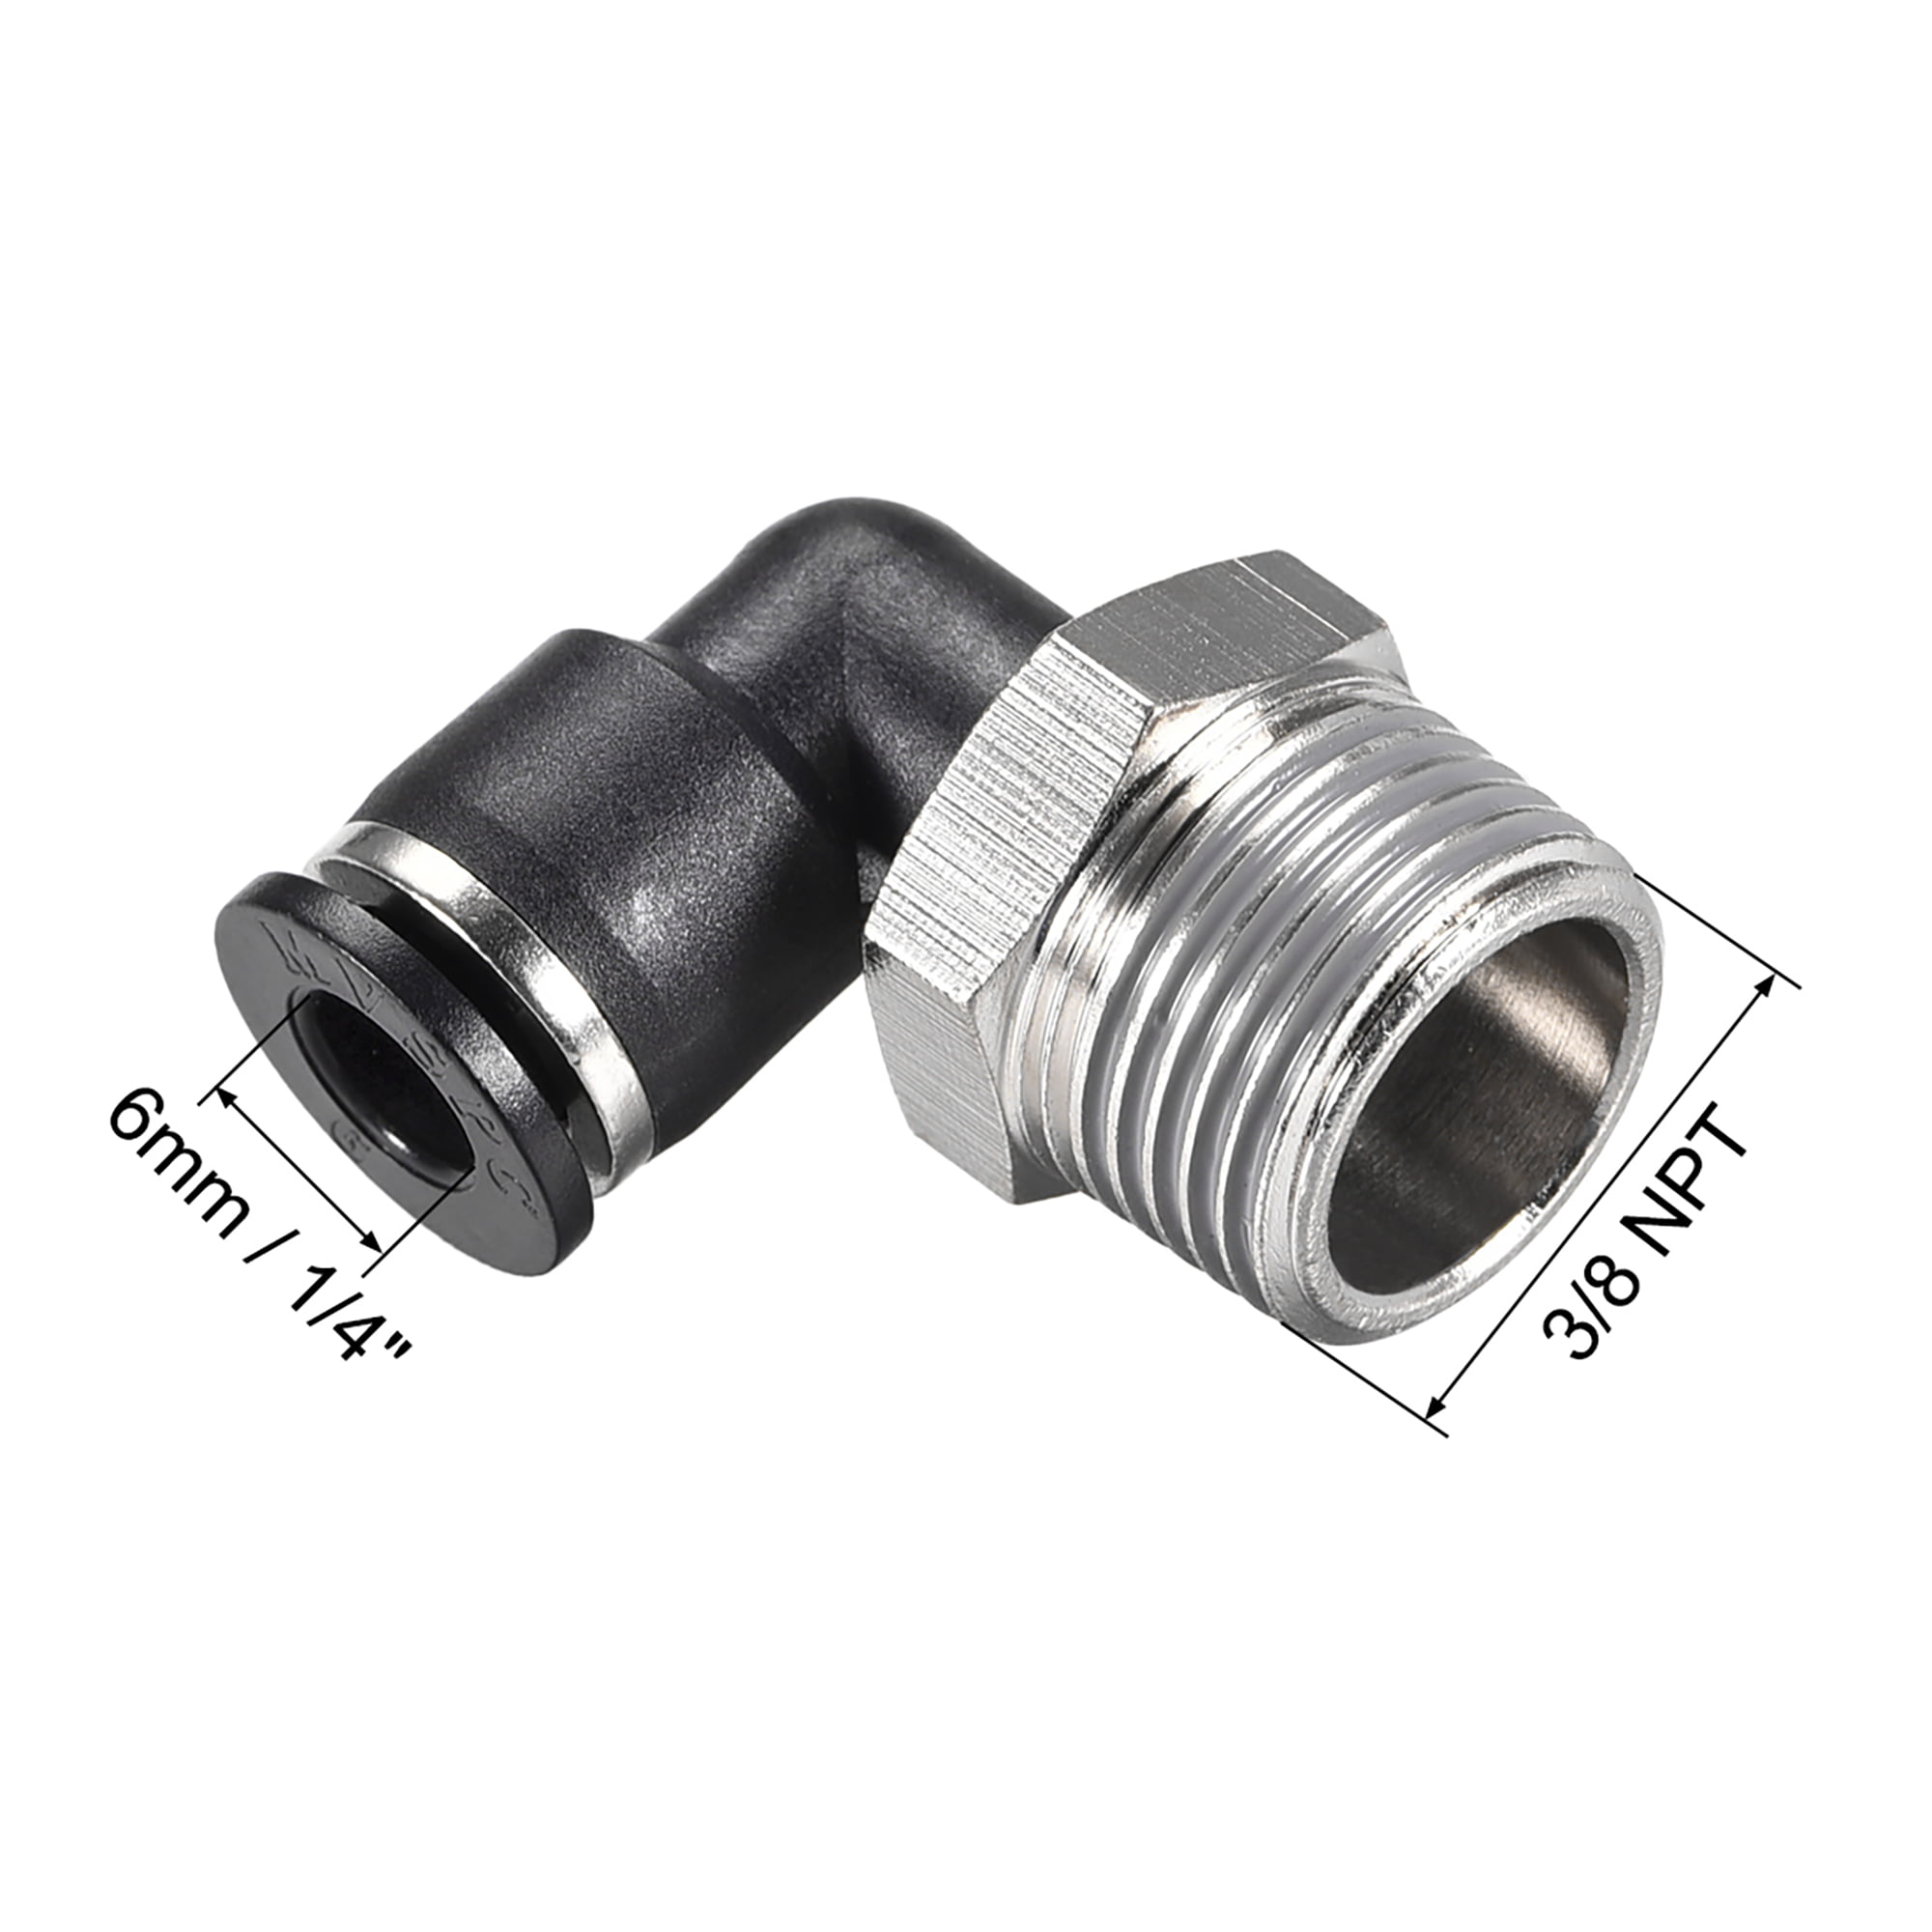 6 mm Tube Push in Fitting to 3/8" BSPP Female Air Pneumatic Connector 